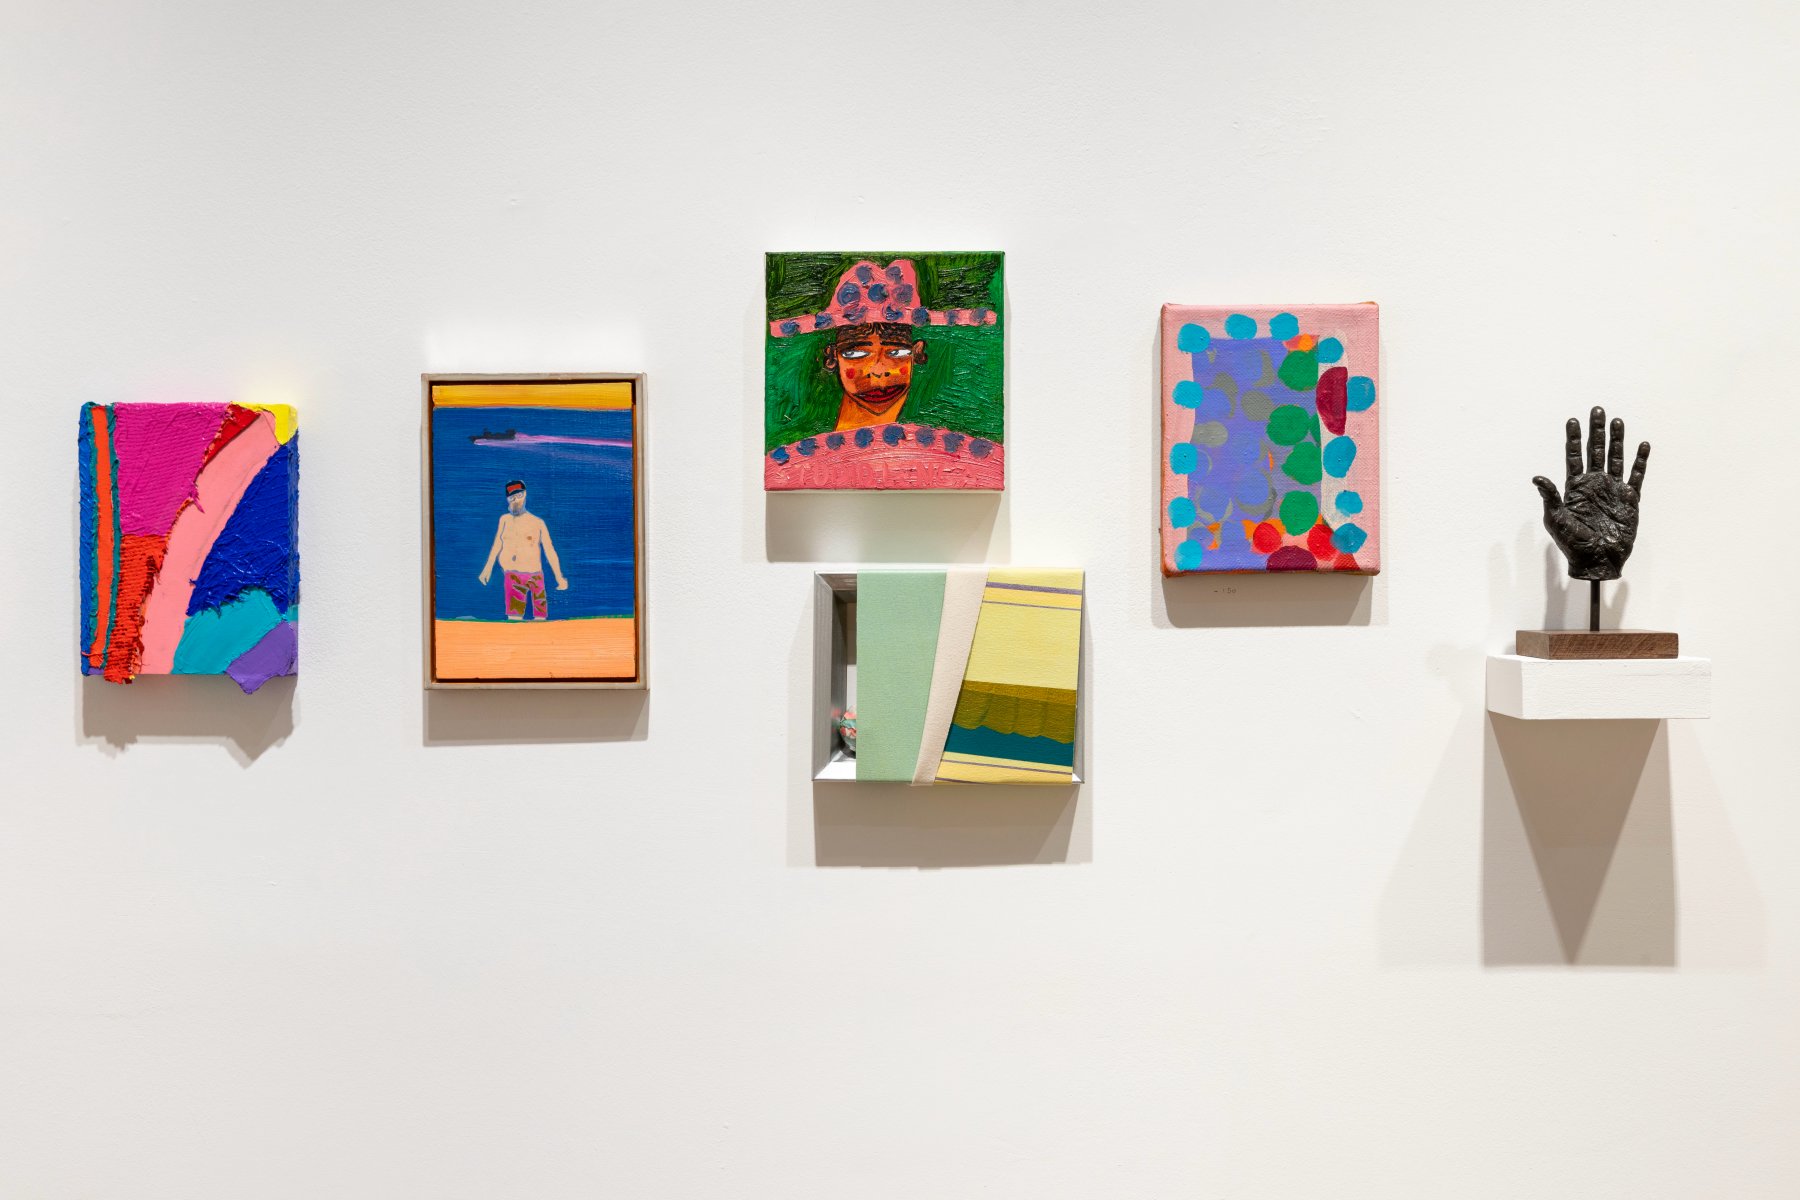 Installation image for Small is Beautiful: 41st Edition, at Flowers Gallery